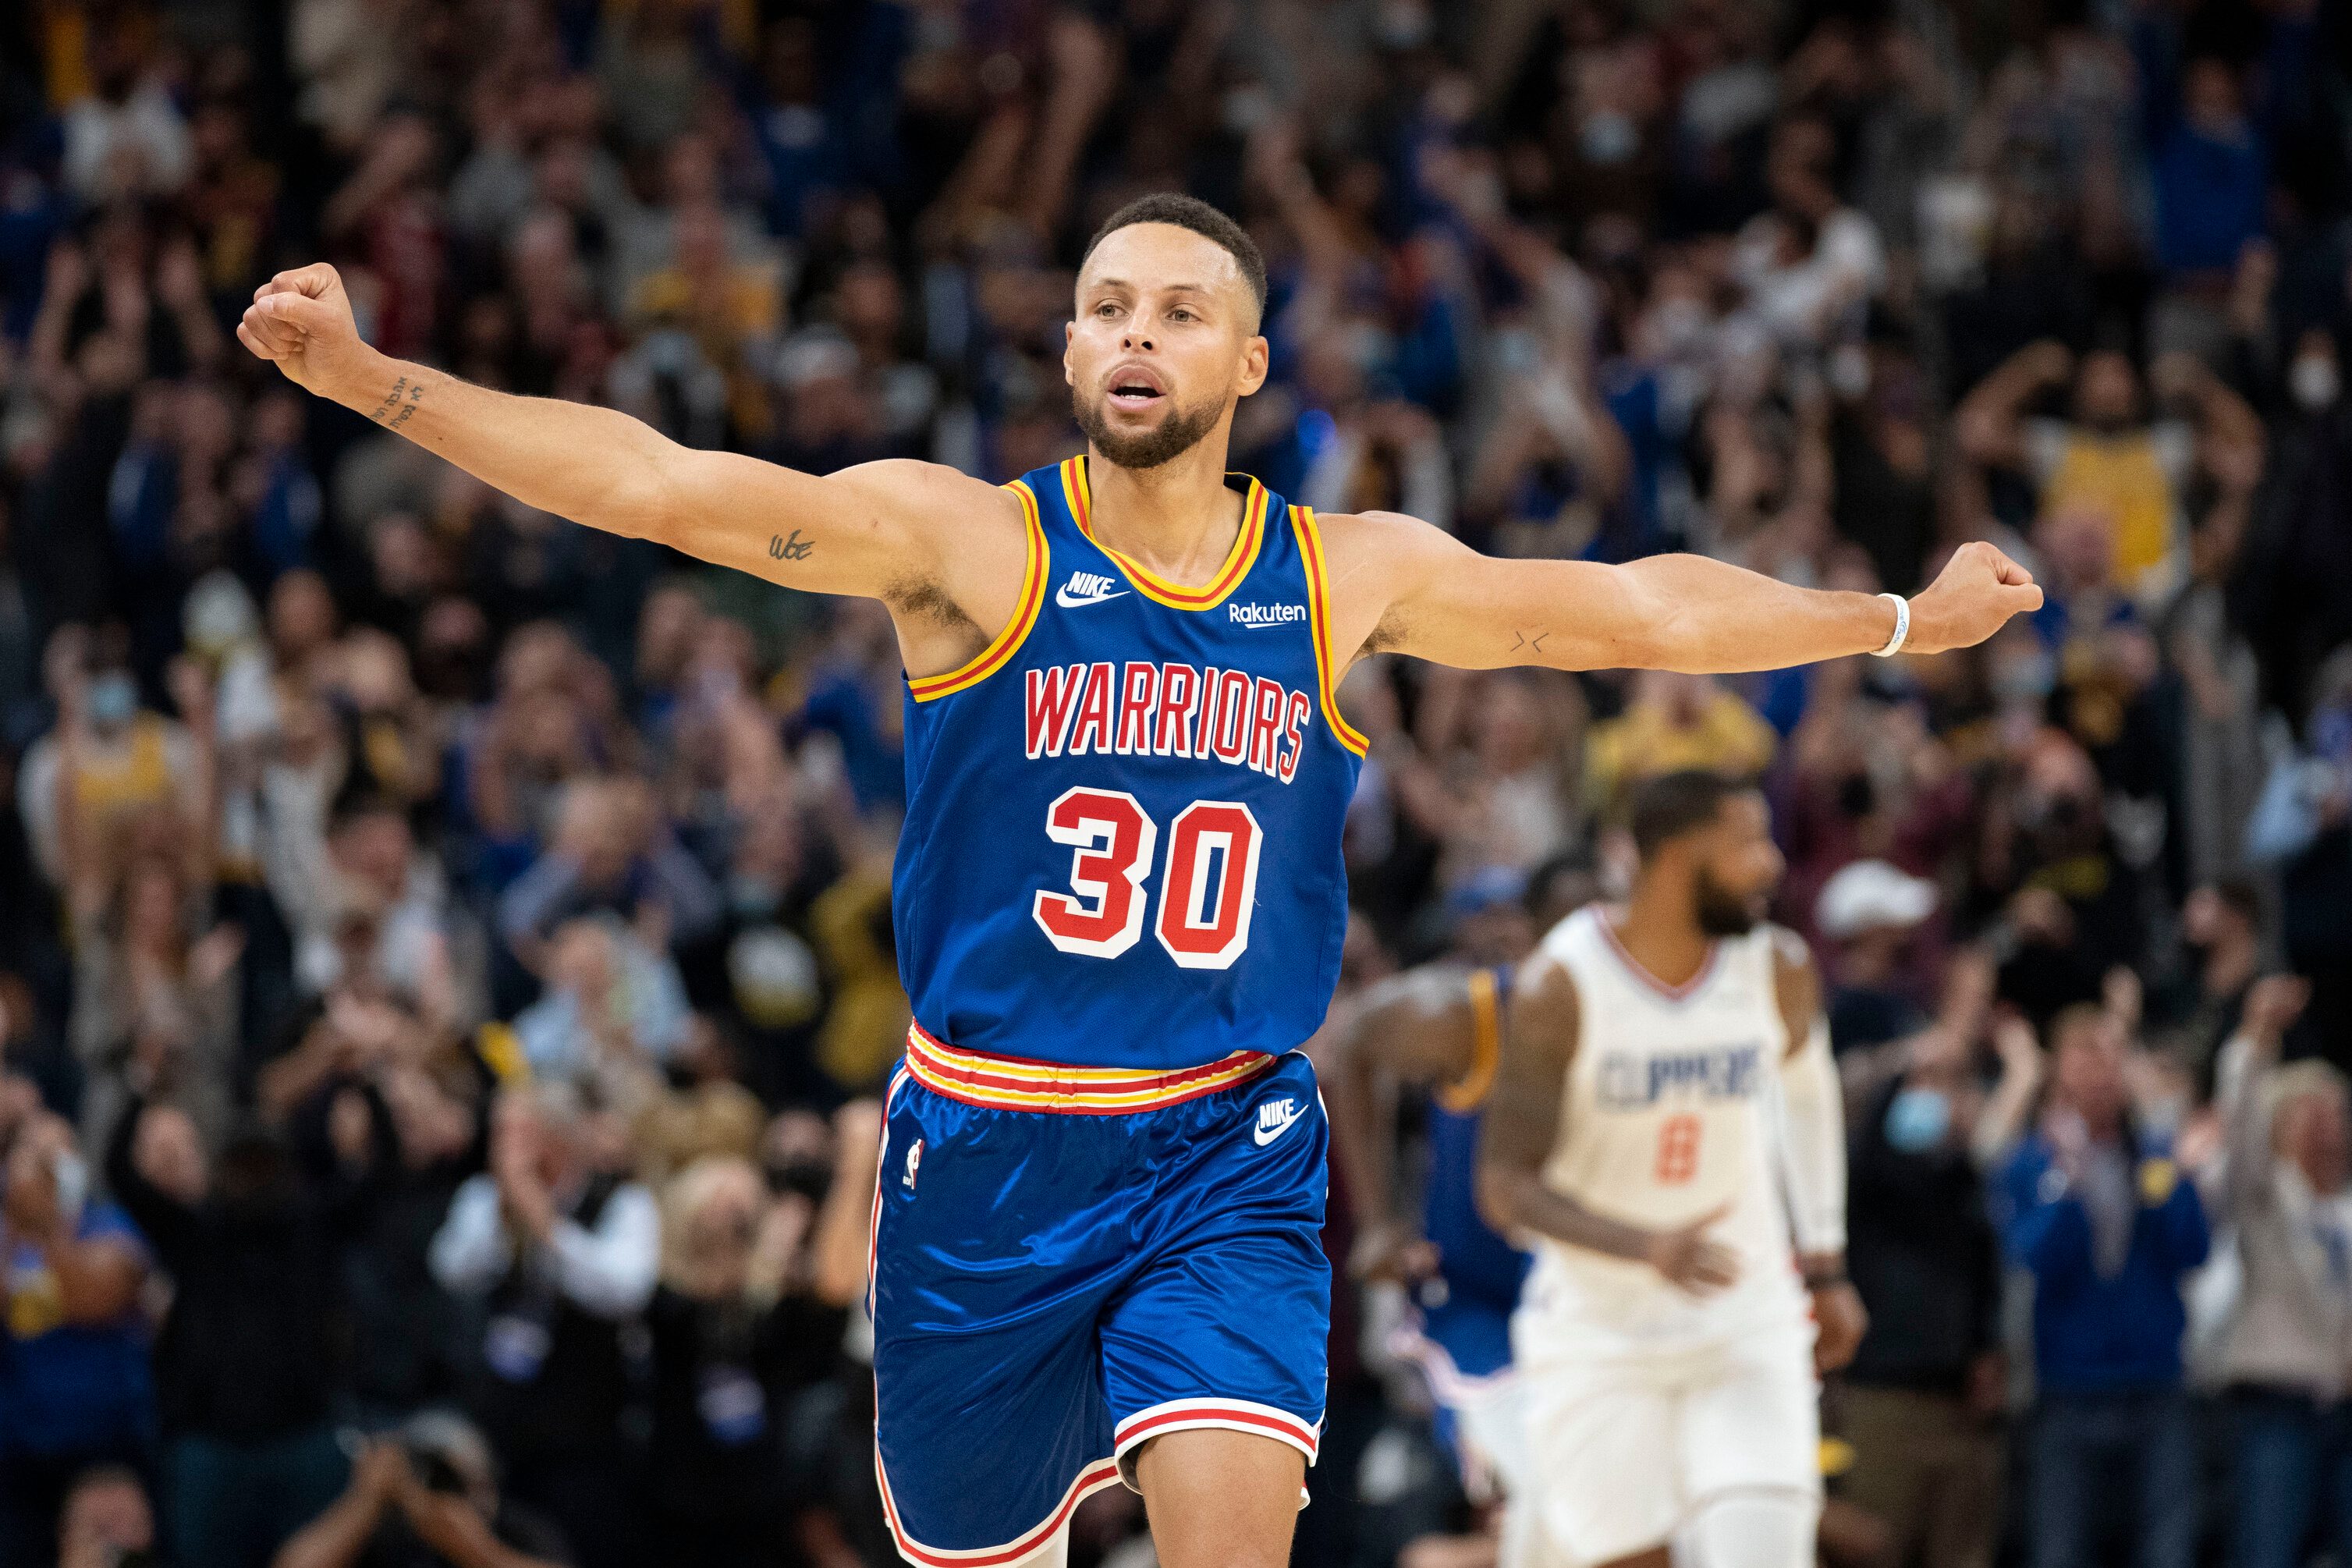 ‘I wasn’t prepared’: Curry agonizes over one of ‘biggest regrets’ of his career